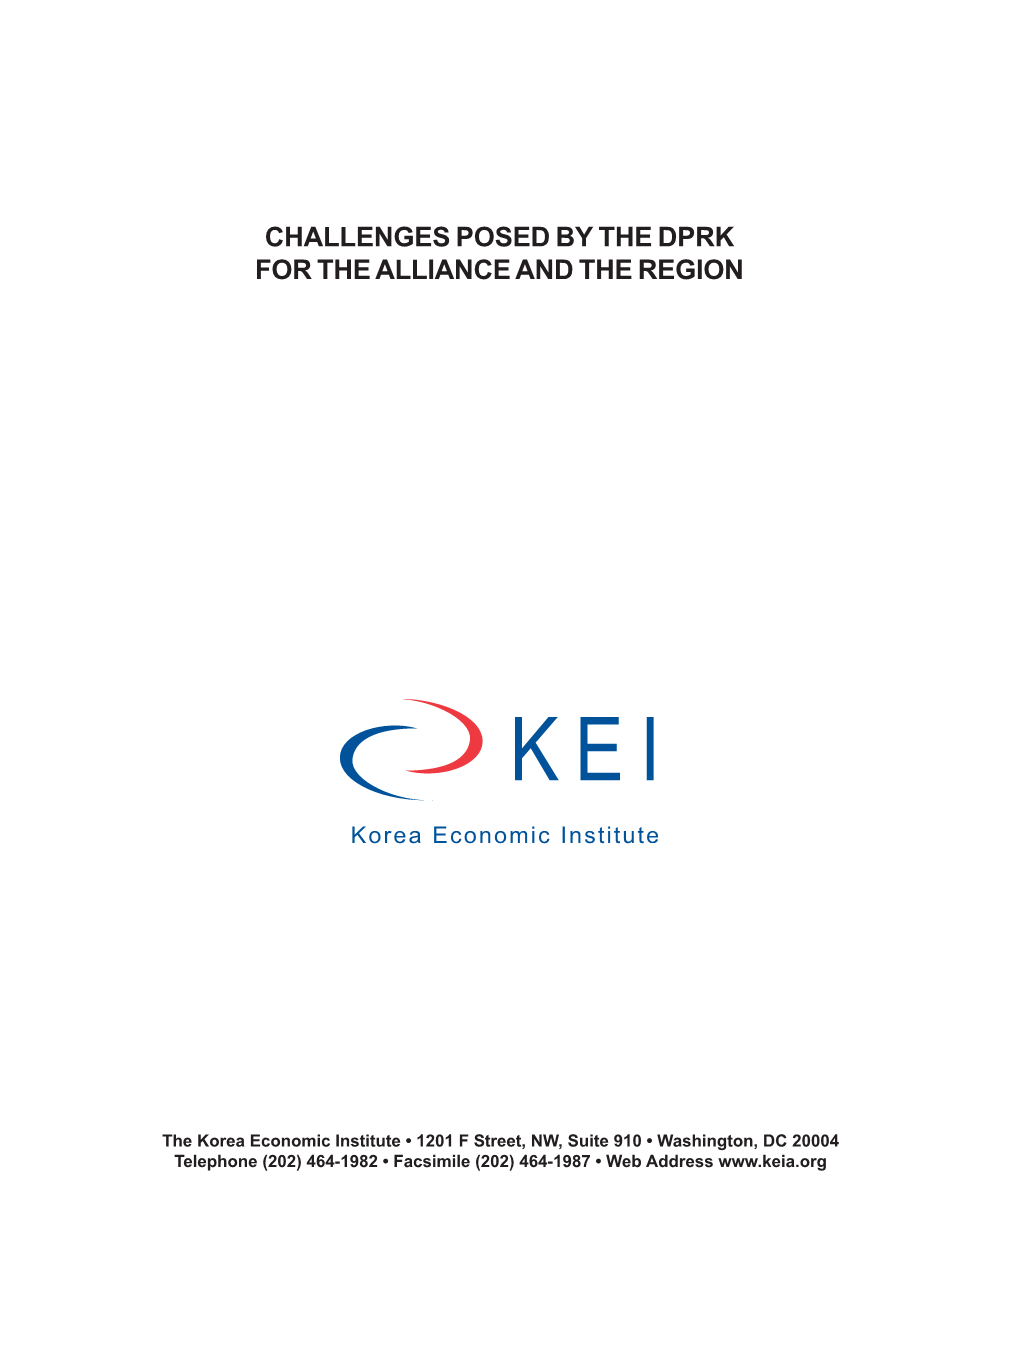 CHALLENGES POSED by the DPRK for the ALLIANCE and the REGION Washington, D.C